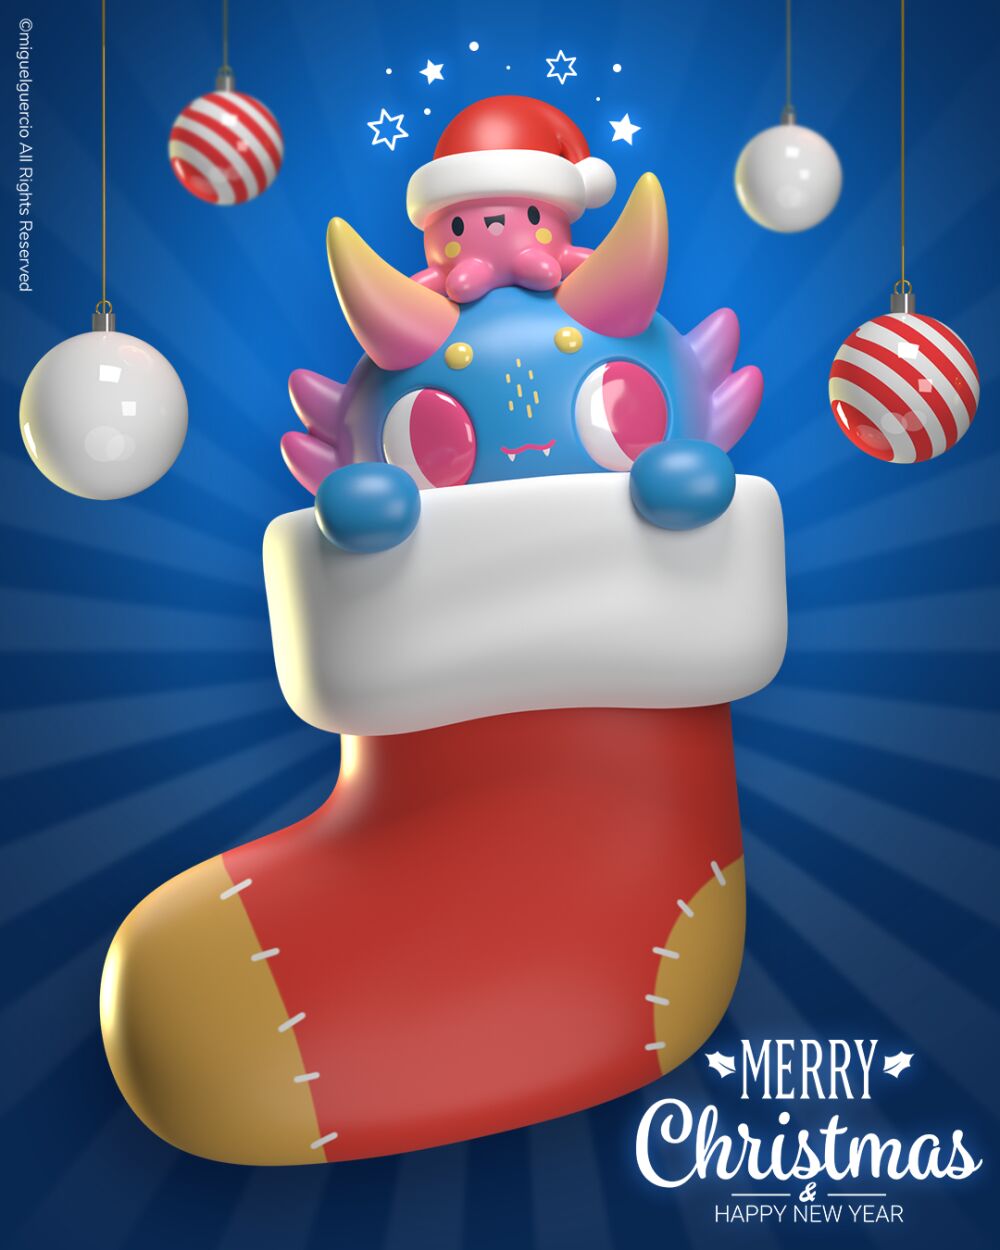 Christmas artwork in 3D by the character designer Miguel Guercio